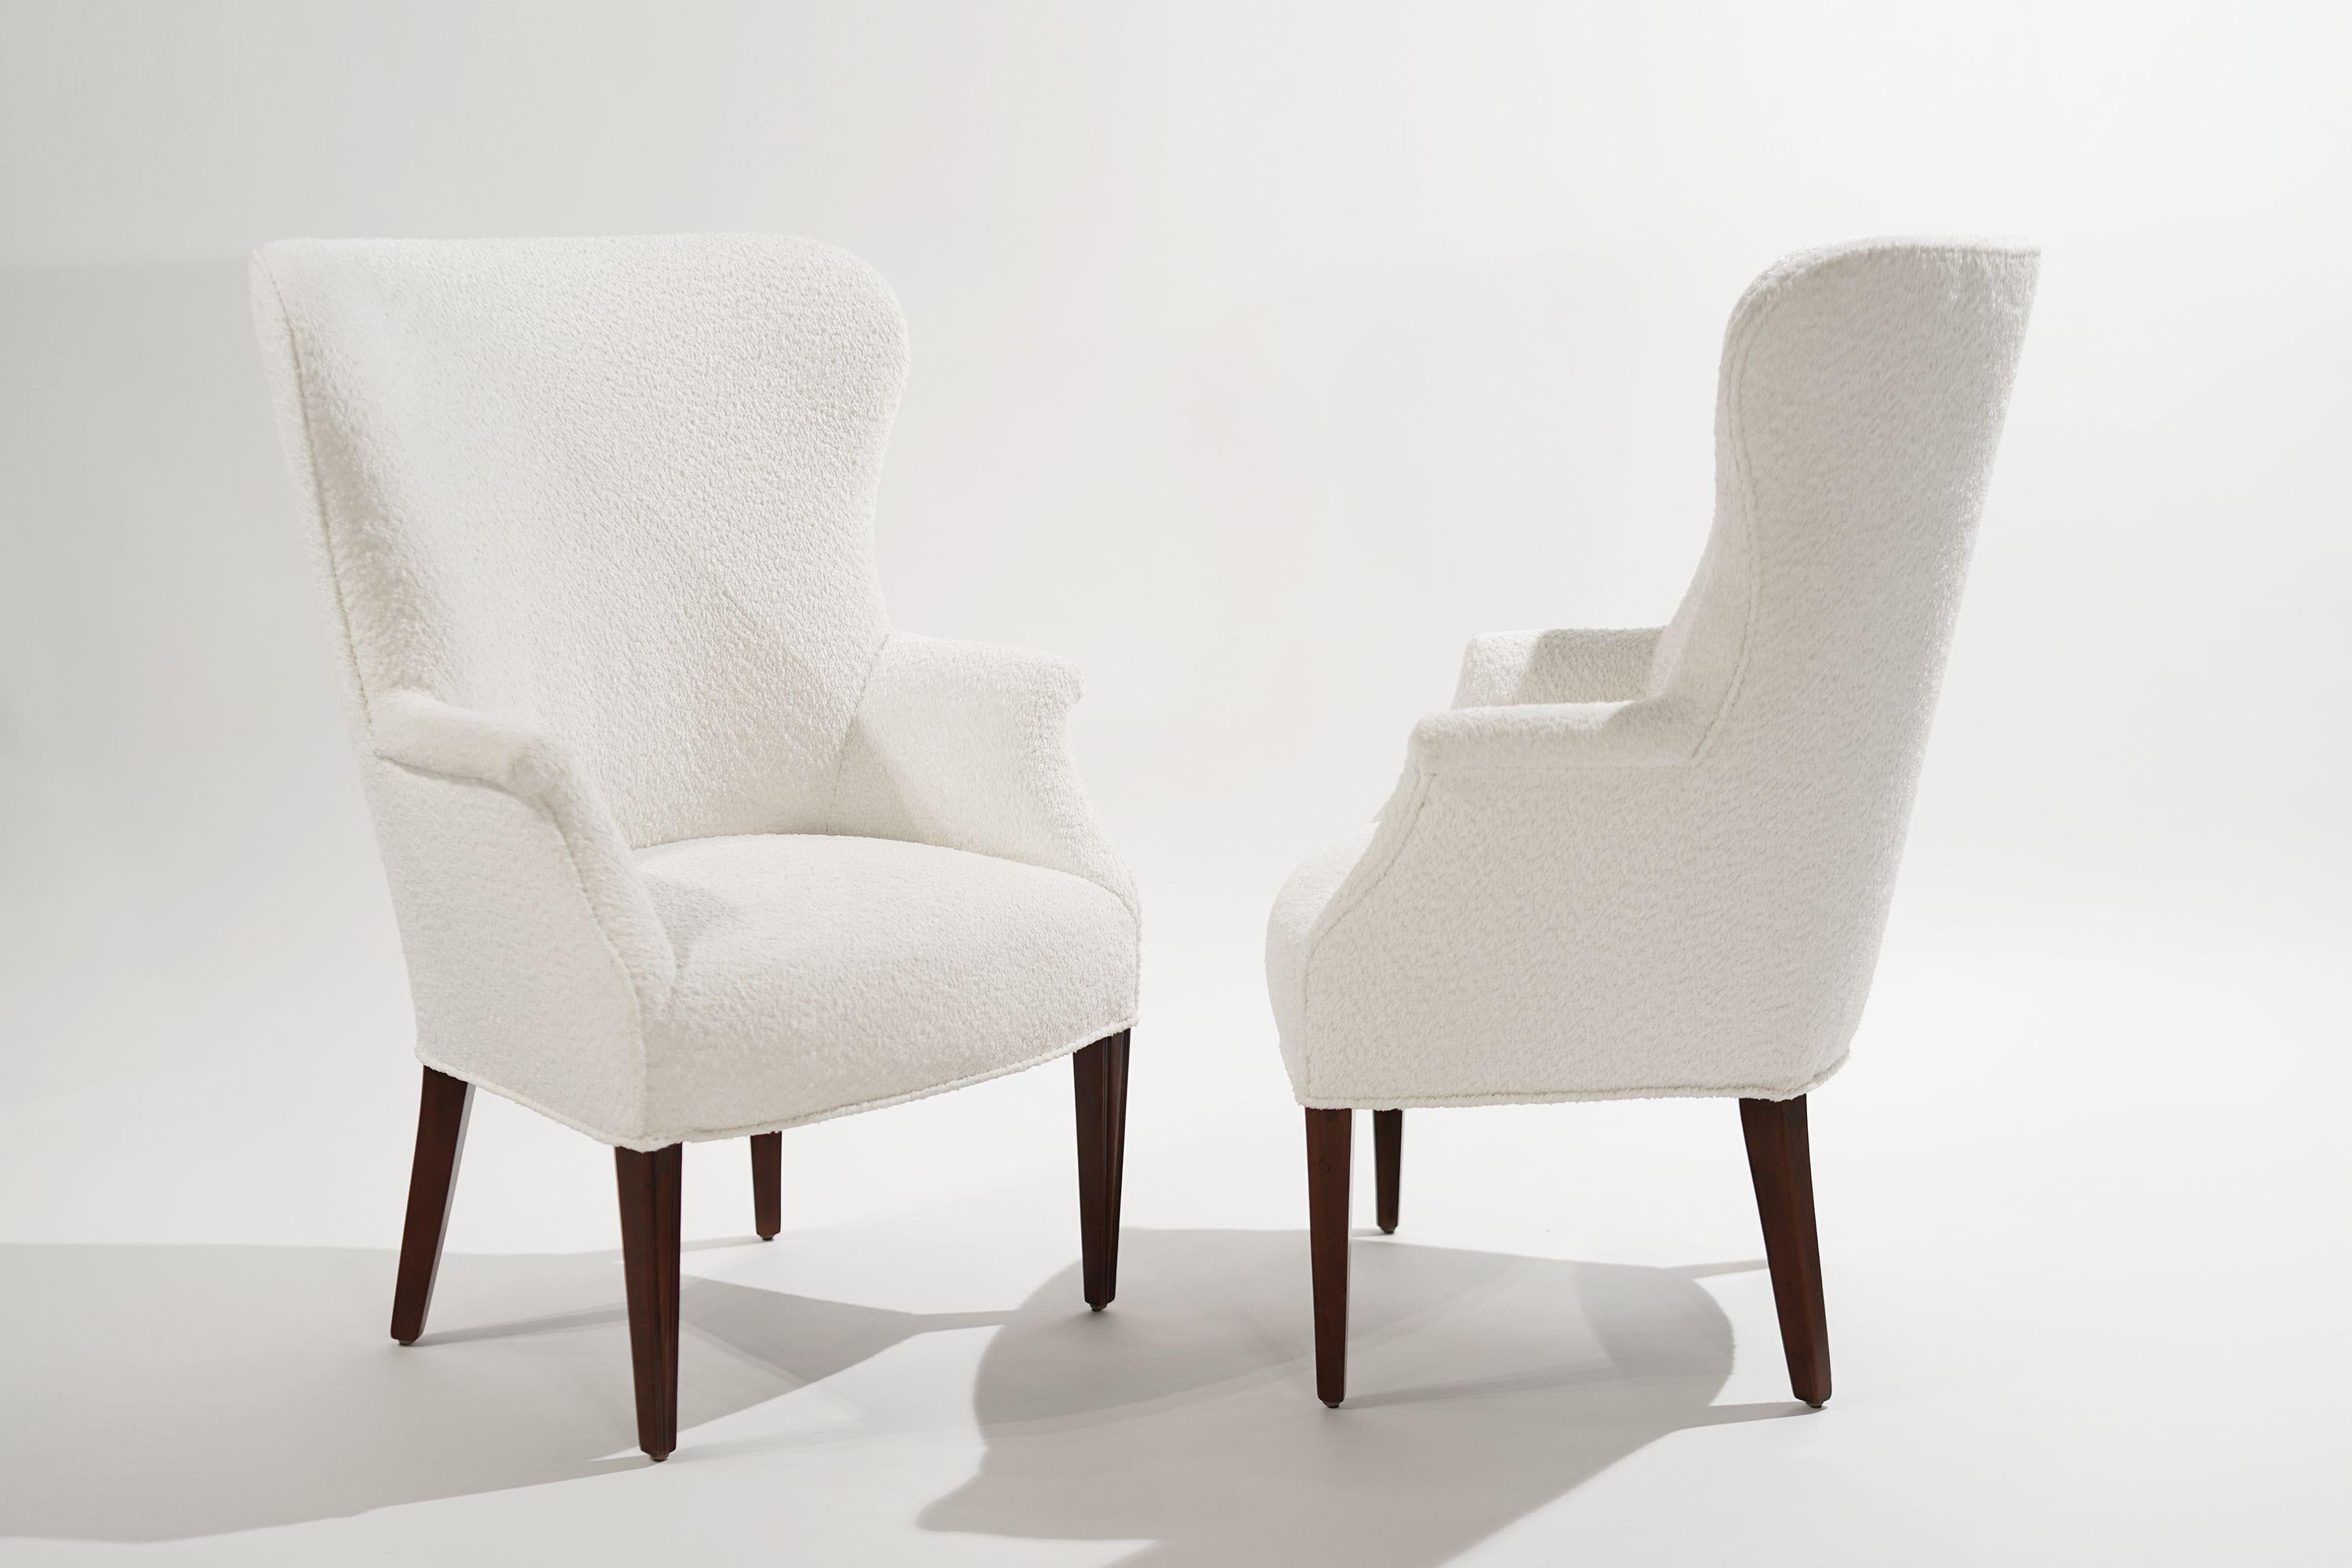 Set of Mid-Century Modern wingback chairs in the style of Edward Wormley, circa 1950s. Completely restored and reupholstered in Italian bouclé.

Other designers from this period include Paul McCobb, Vladimir Kagan, Hans Wegner, Gio Ponti, and T.H.